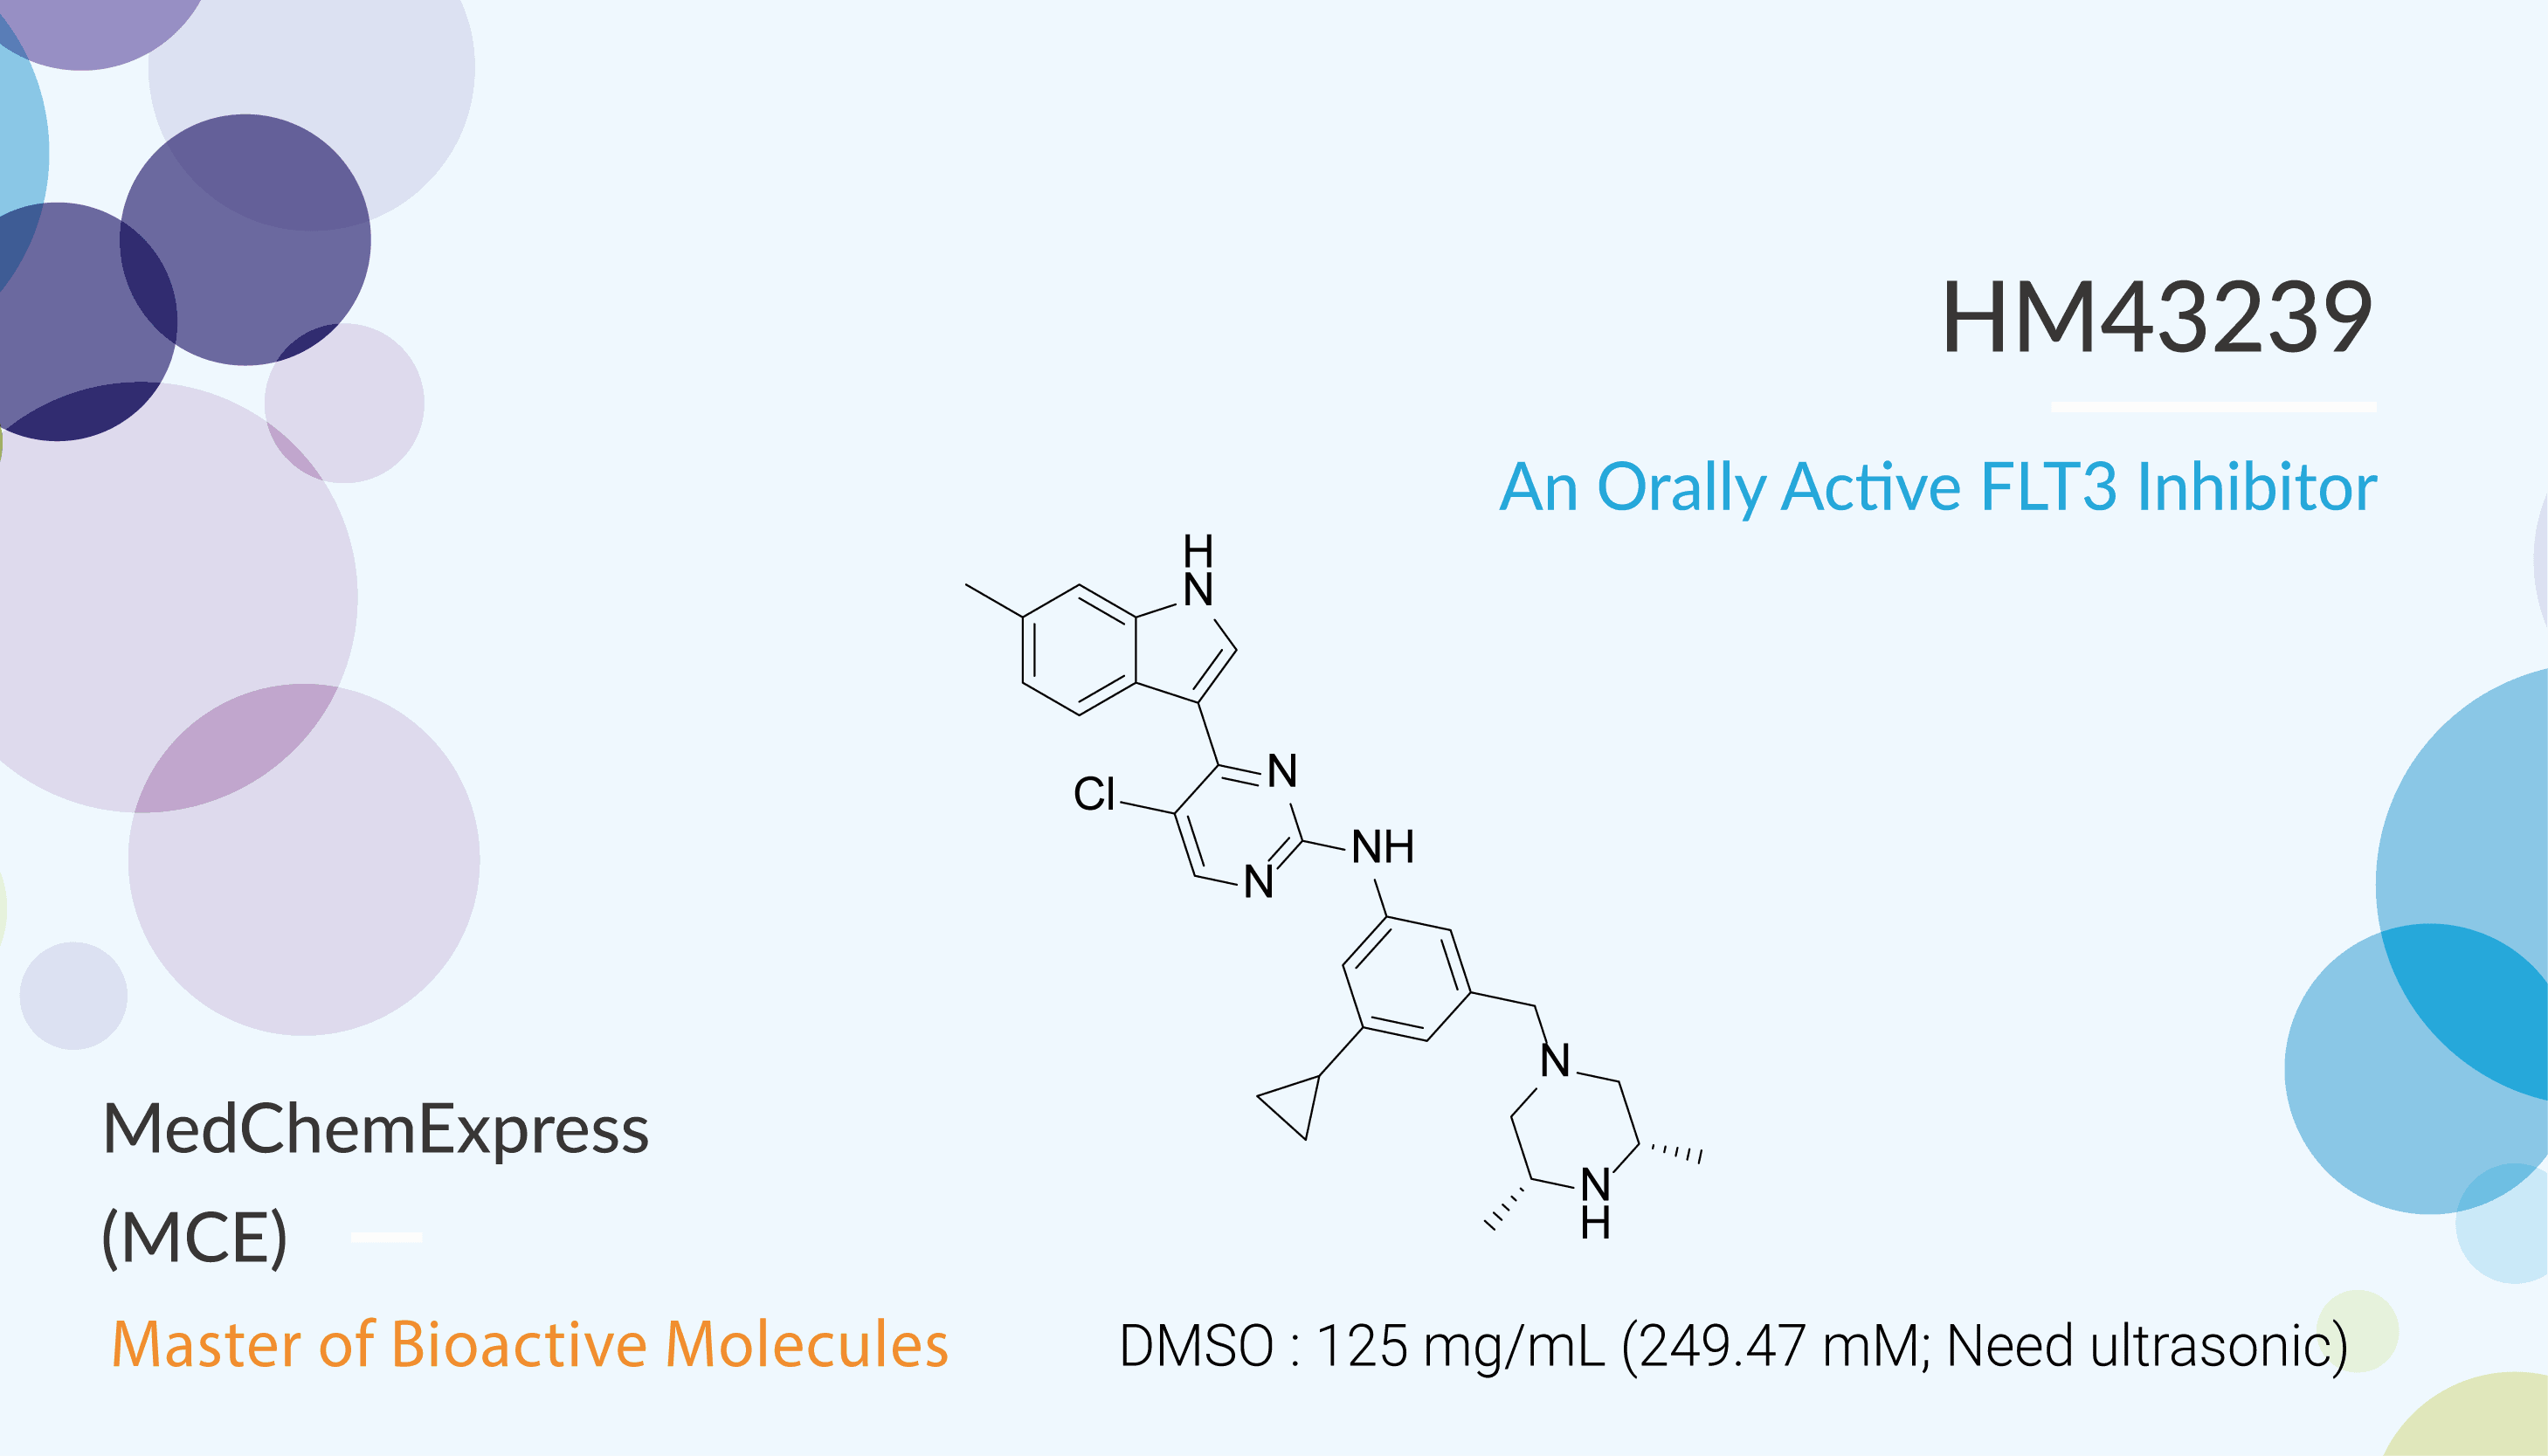 HM43239 is an Orally Active and Selective FLT3 Inhibitor